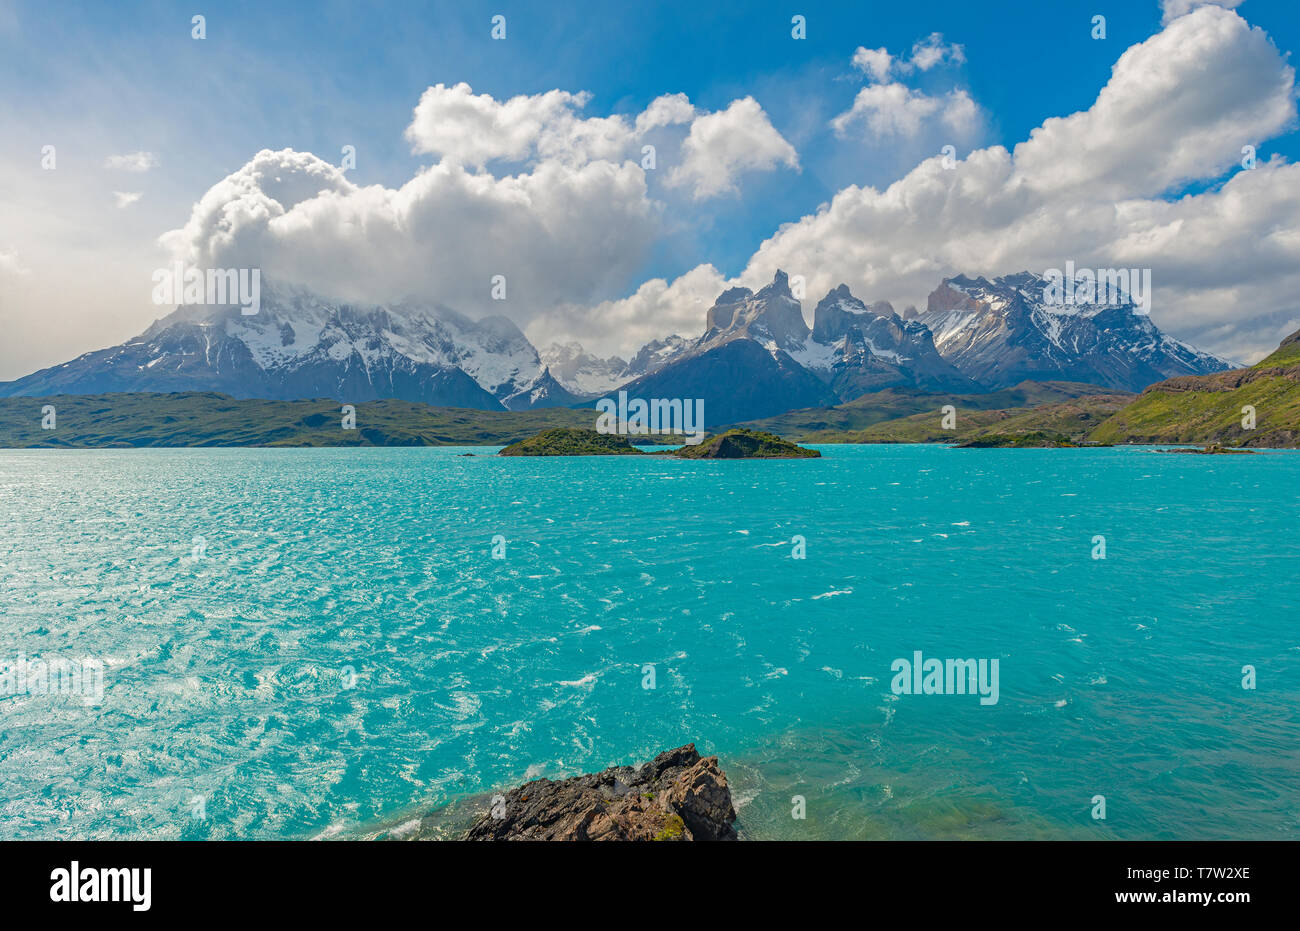 Andes peaks of Torres del Paine national park & turquoise waters of Pehoe Lake: Paine Grande, Cuernos del Paine, Torres del Paine. Patagonia, Chile. Stock Photo